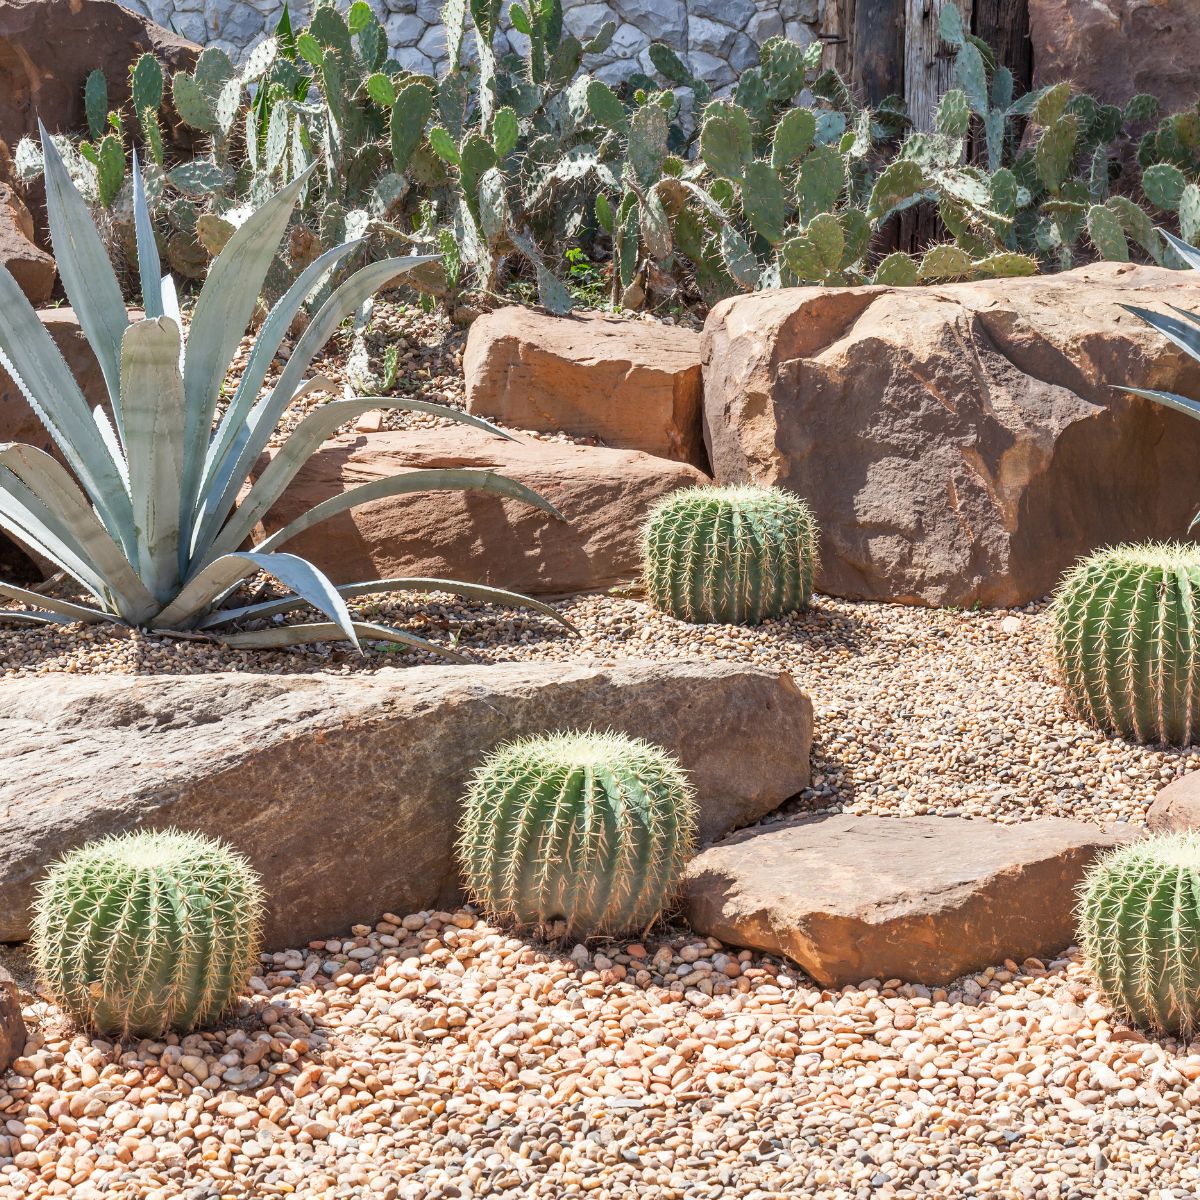 Round, poky cactus plants dotting a rock garden with small pebbles and large stone slabs. 